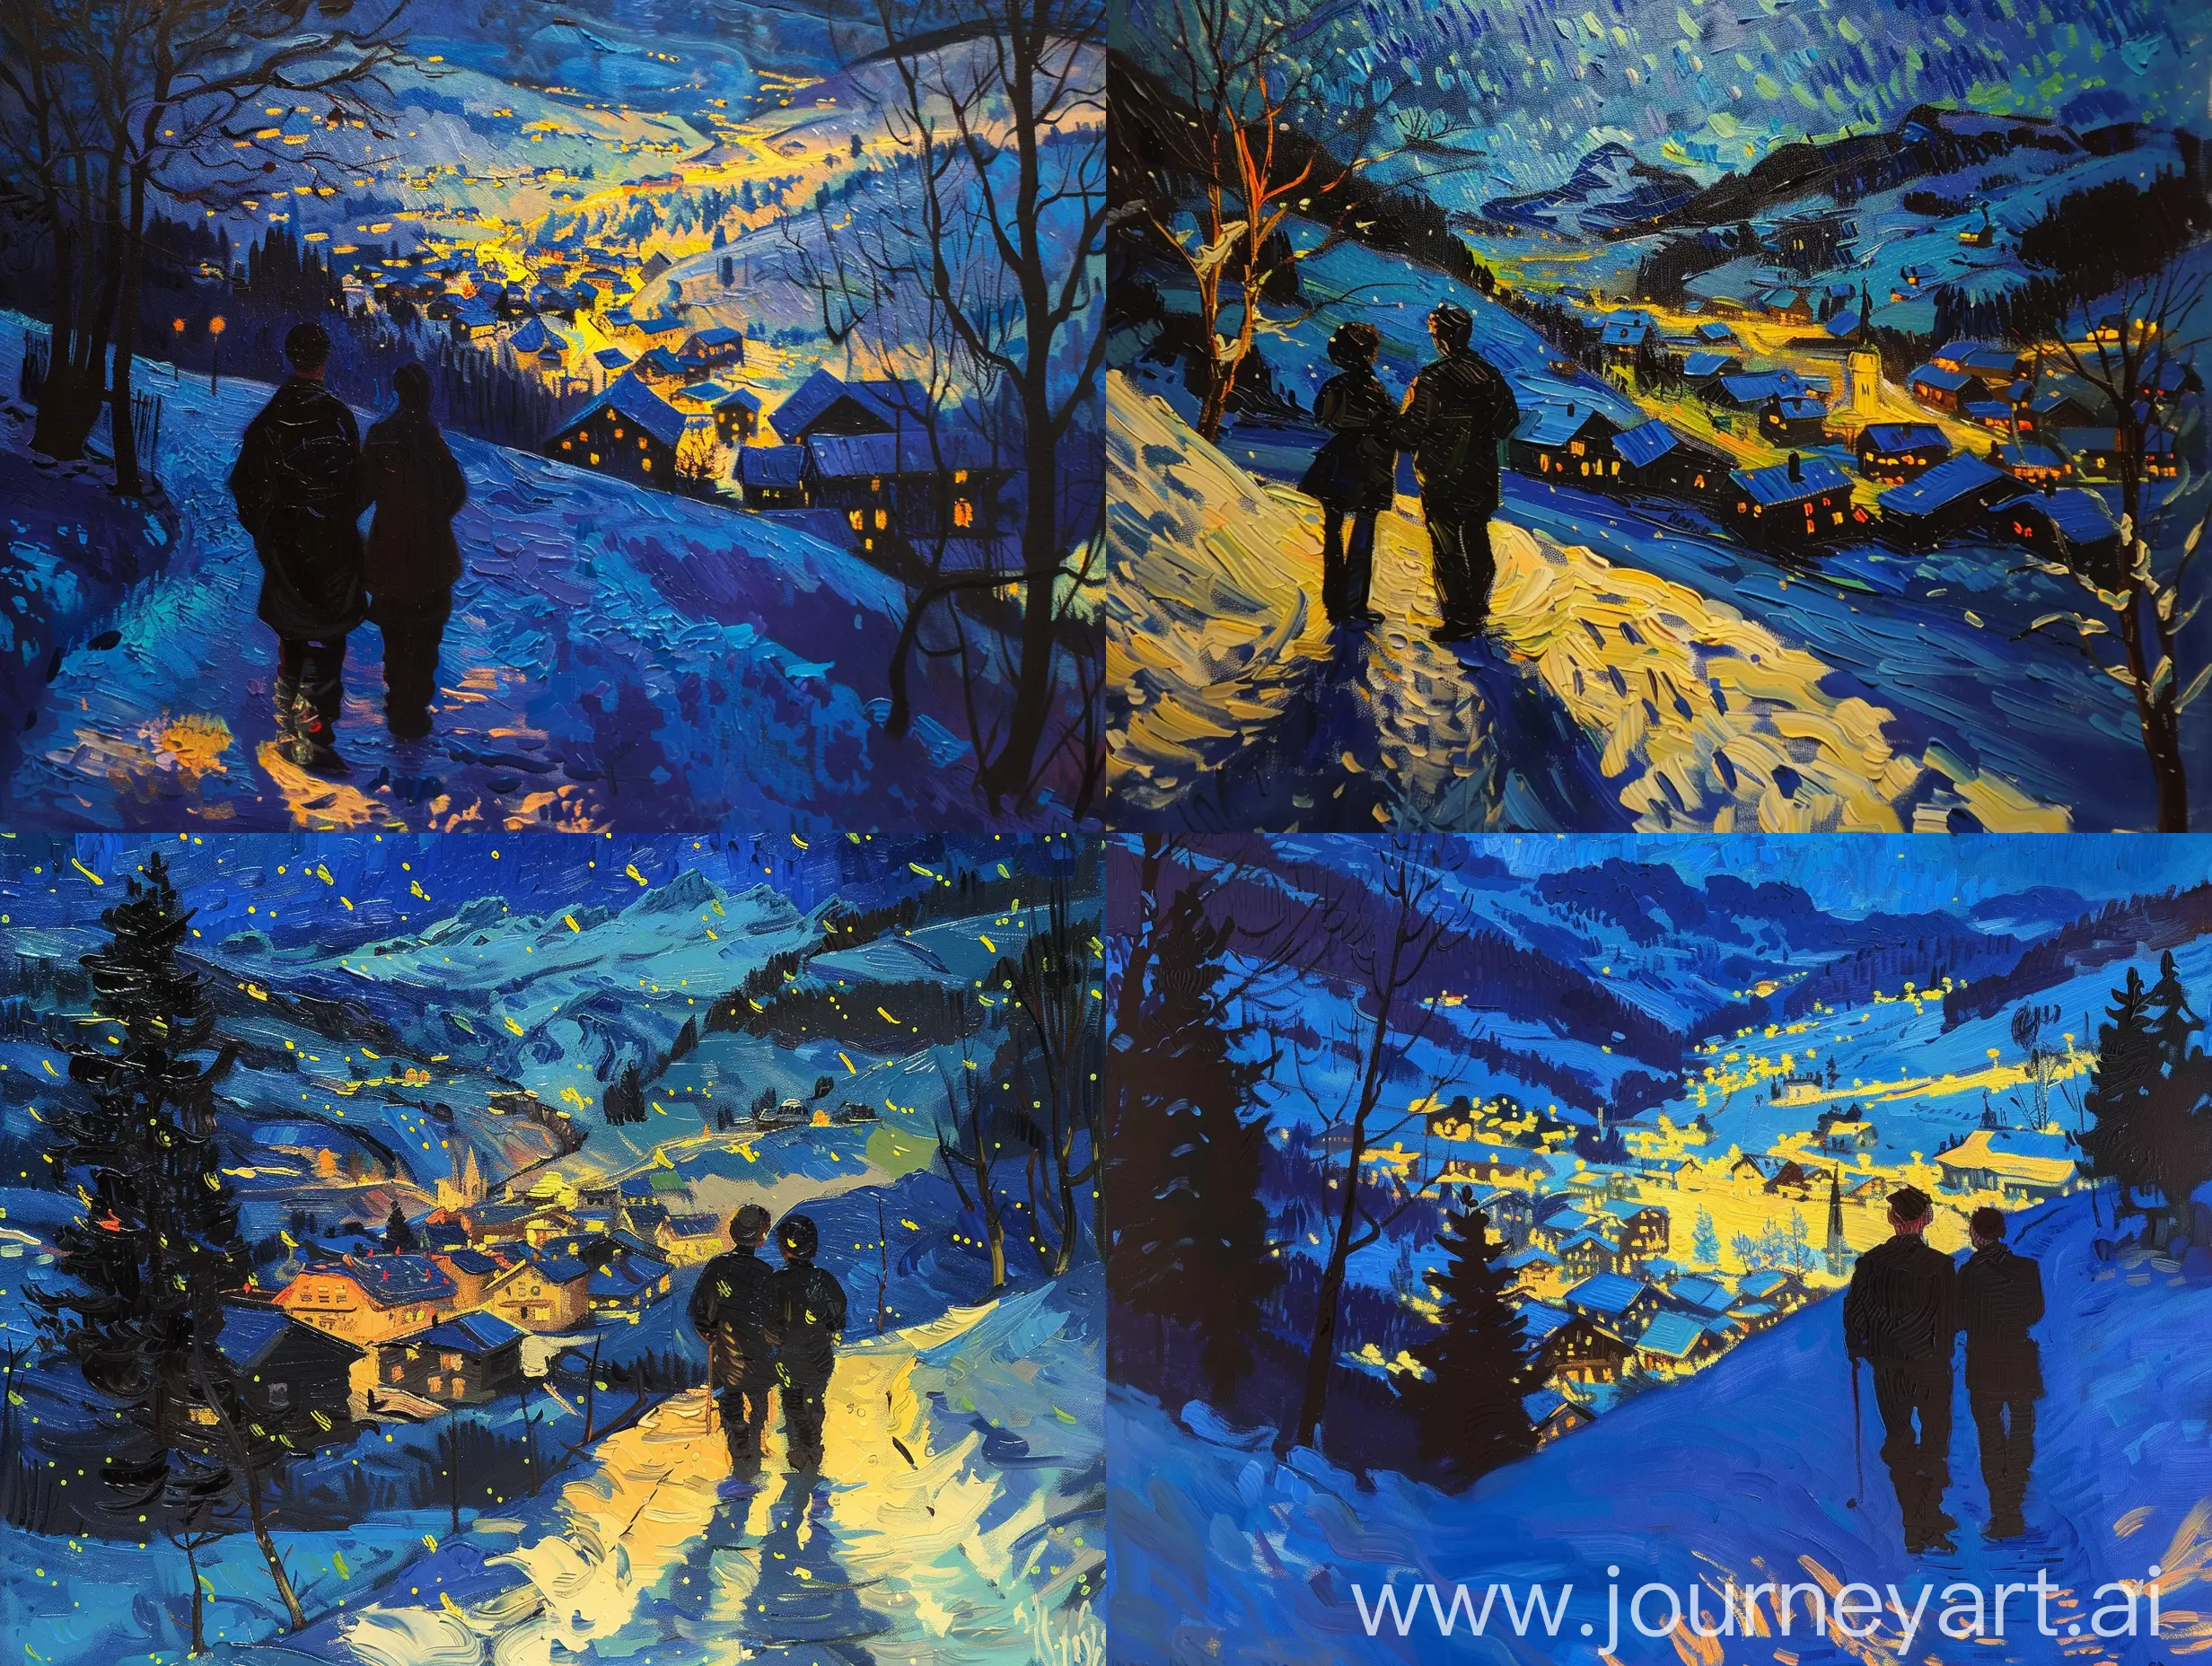 oil painting of a snowy night scene with two silhouetted figures on a path overlooking a village illuminated by warm yellow lights, showcasing bold brushstrokes and vibrant color contrasts in a post-impressionist or expressionist style in van gogh style